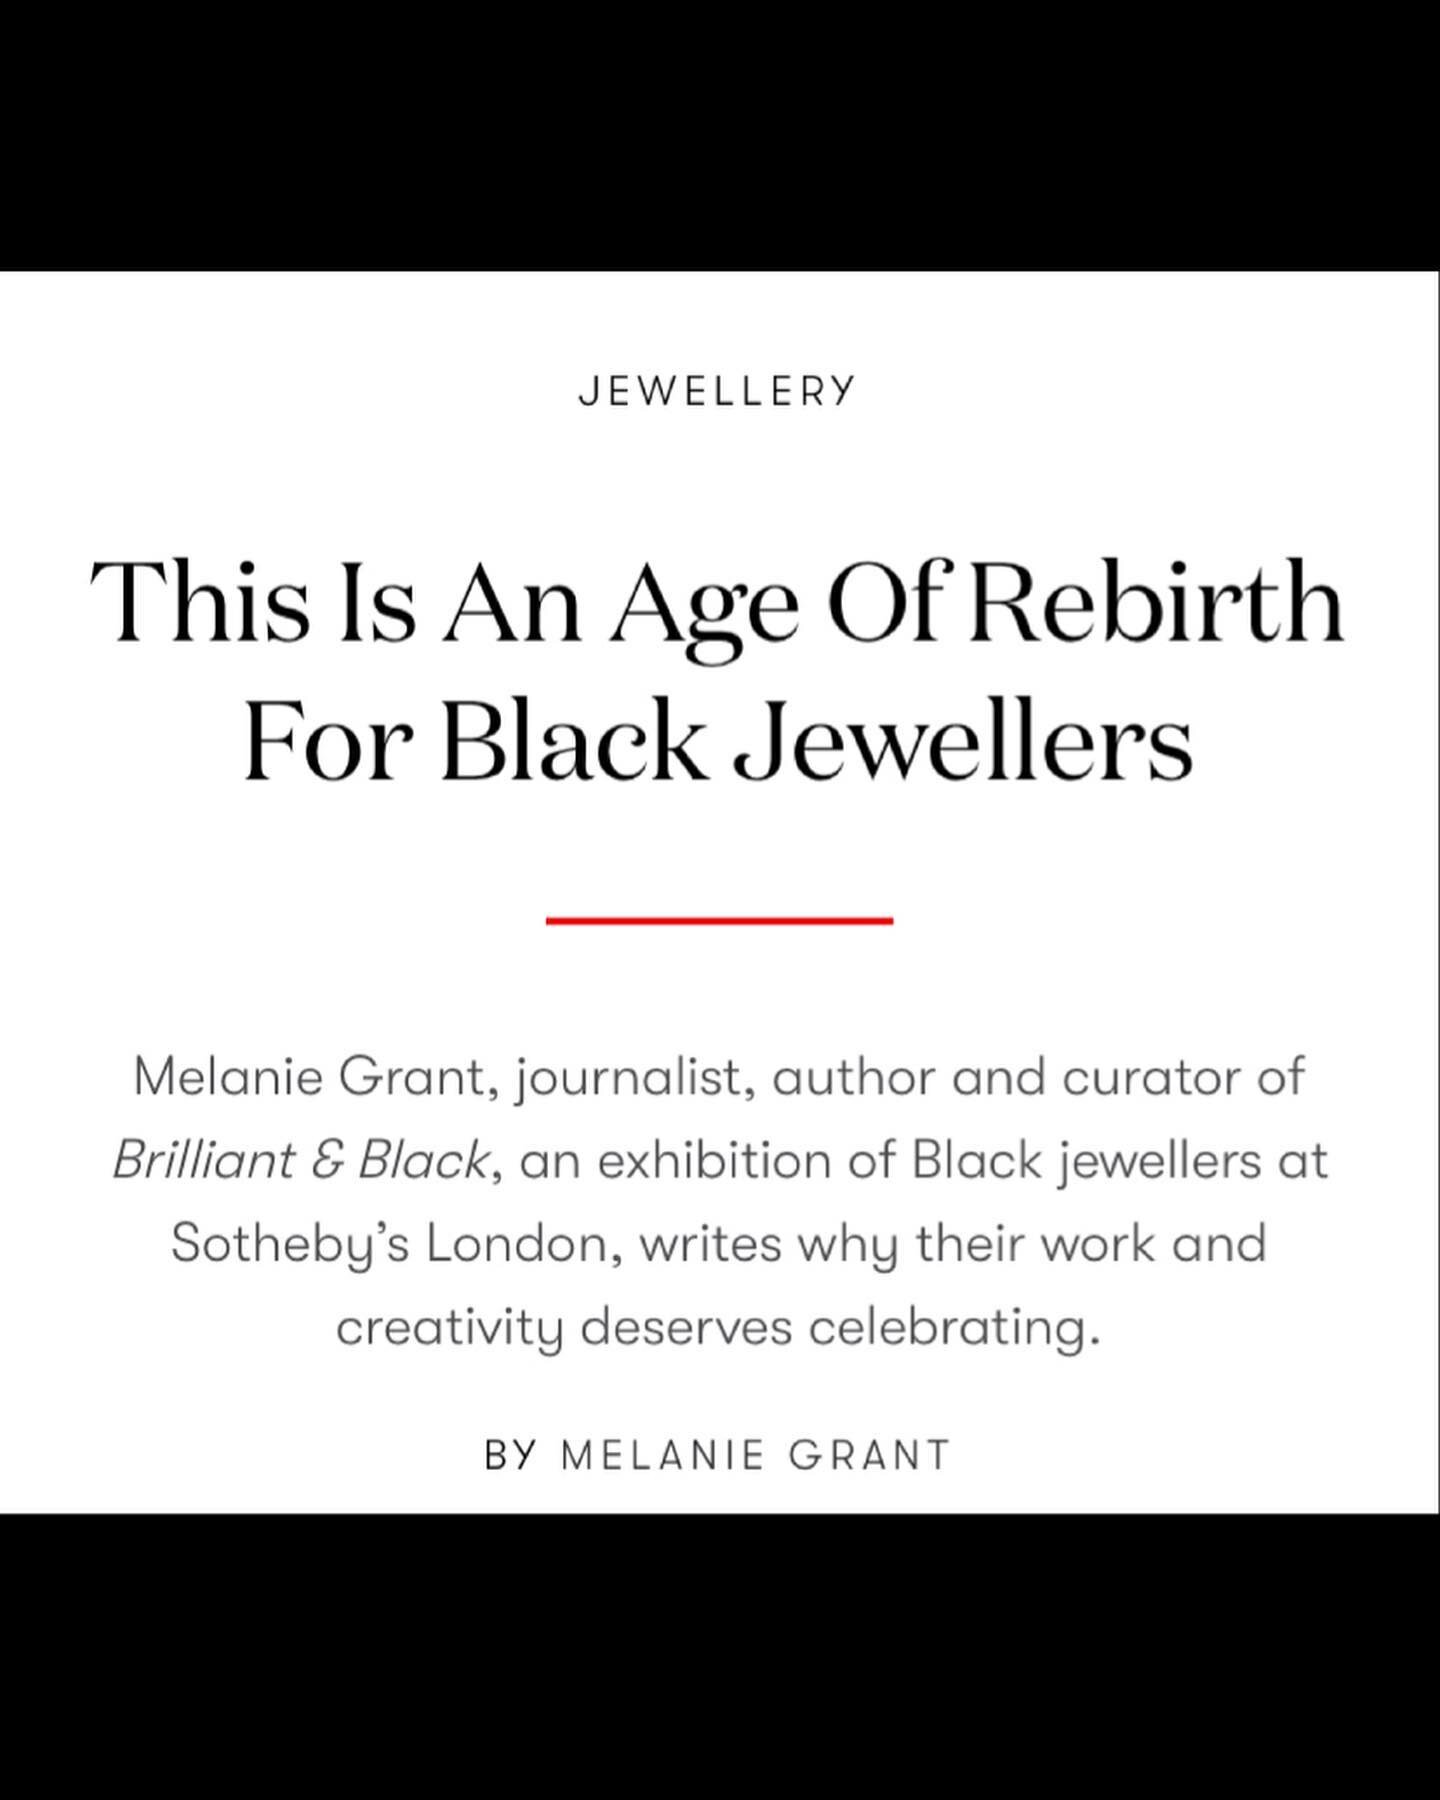 #BrilliantAndBlack &mdash; the exhibition of #blackjewelers at #Sothebys &mdash; returns to celebrate 25 black jewelry designers. #Vogue broke the story this morning and I woke up to a message that said &ldquo;you work so hard to uplift others; it&rs